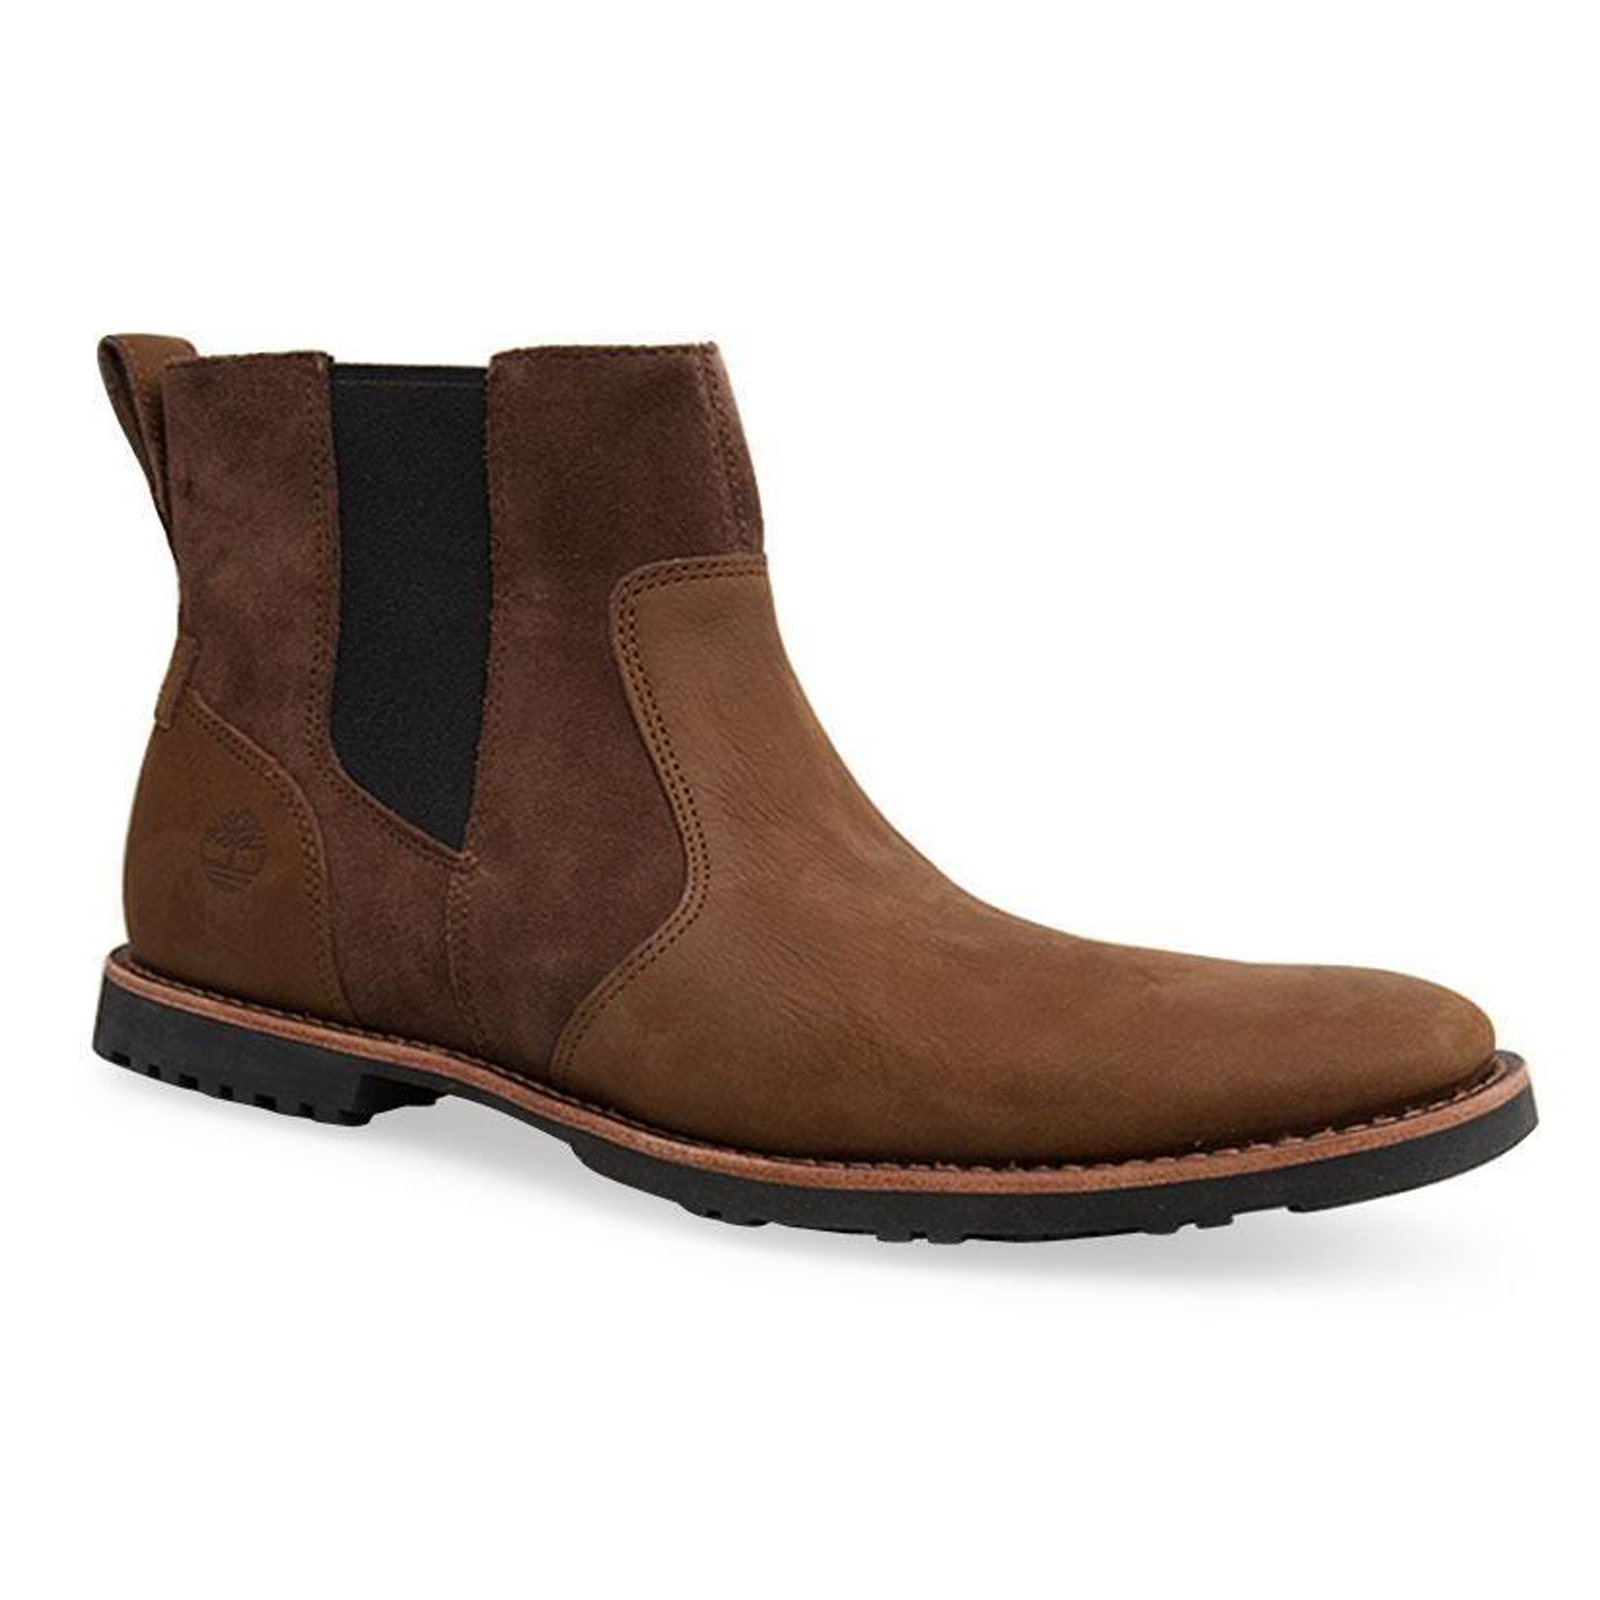 TIMBERLAND Men's Kendrick Chelsea Boots Pull On Shoes with Zip - Dark Brown